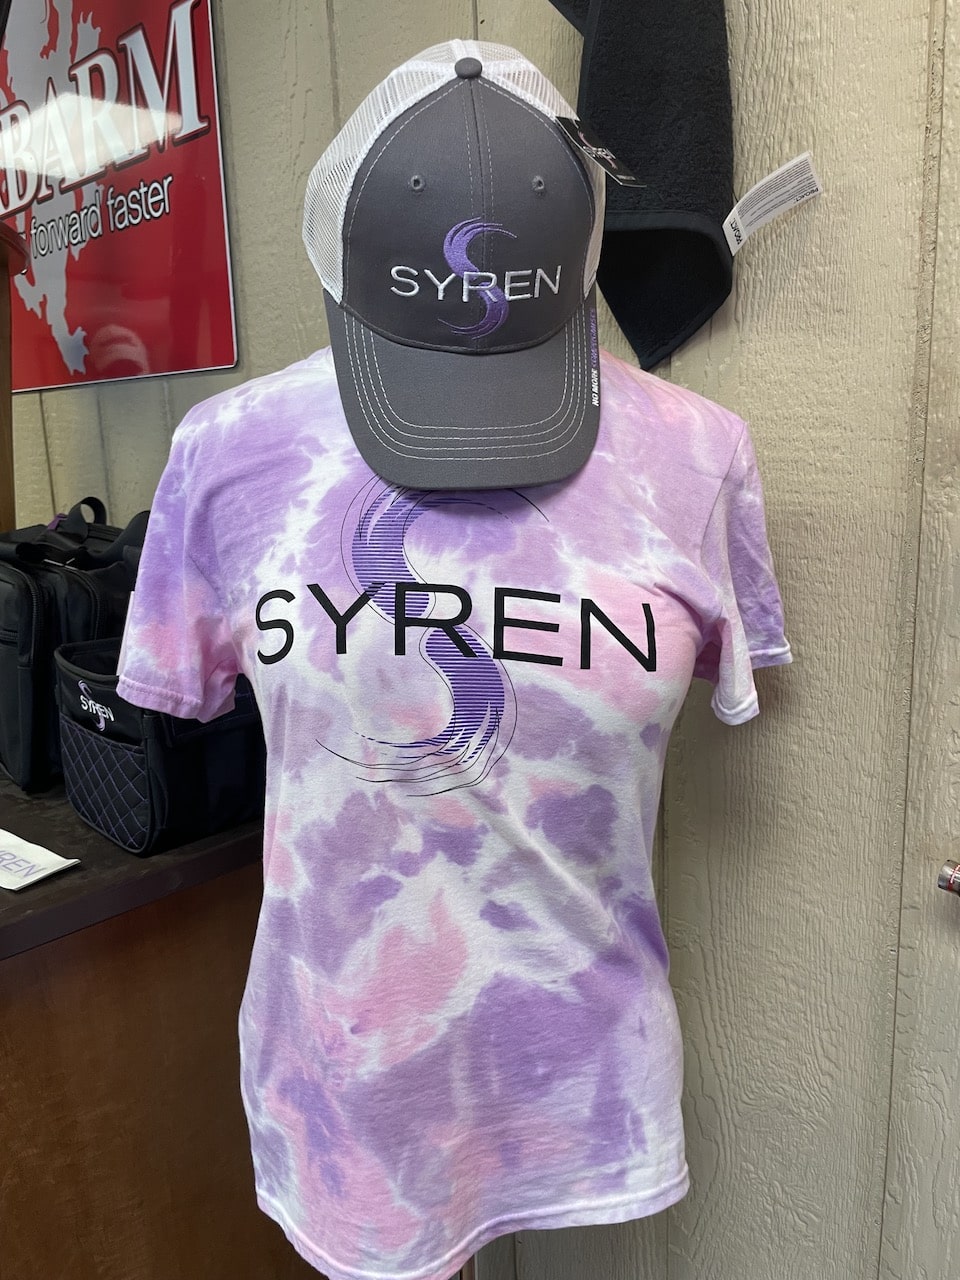 Syren hat and tshirt